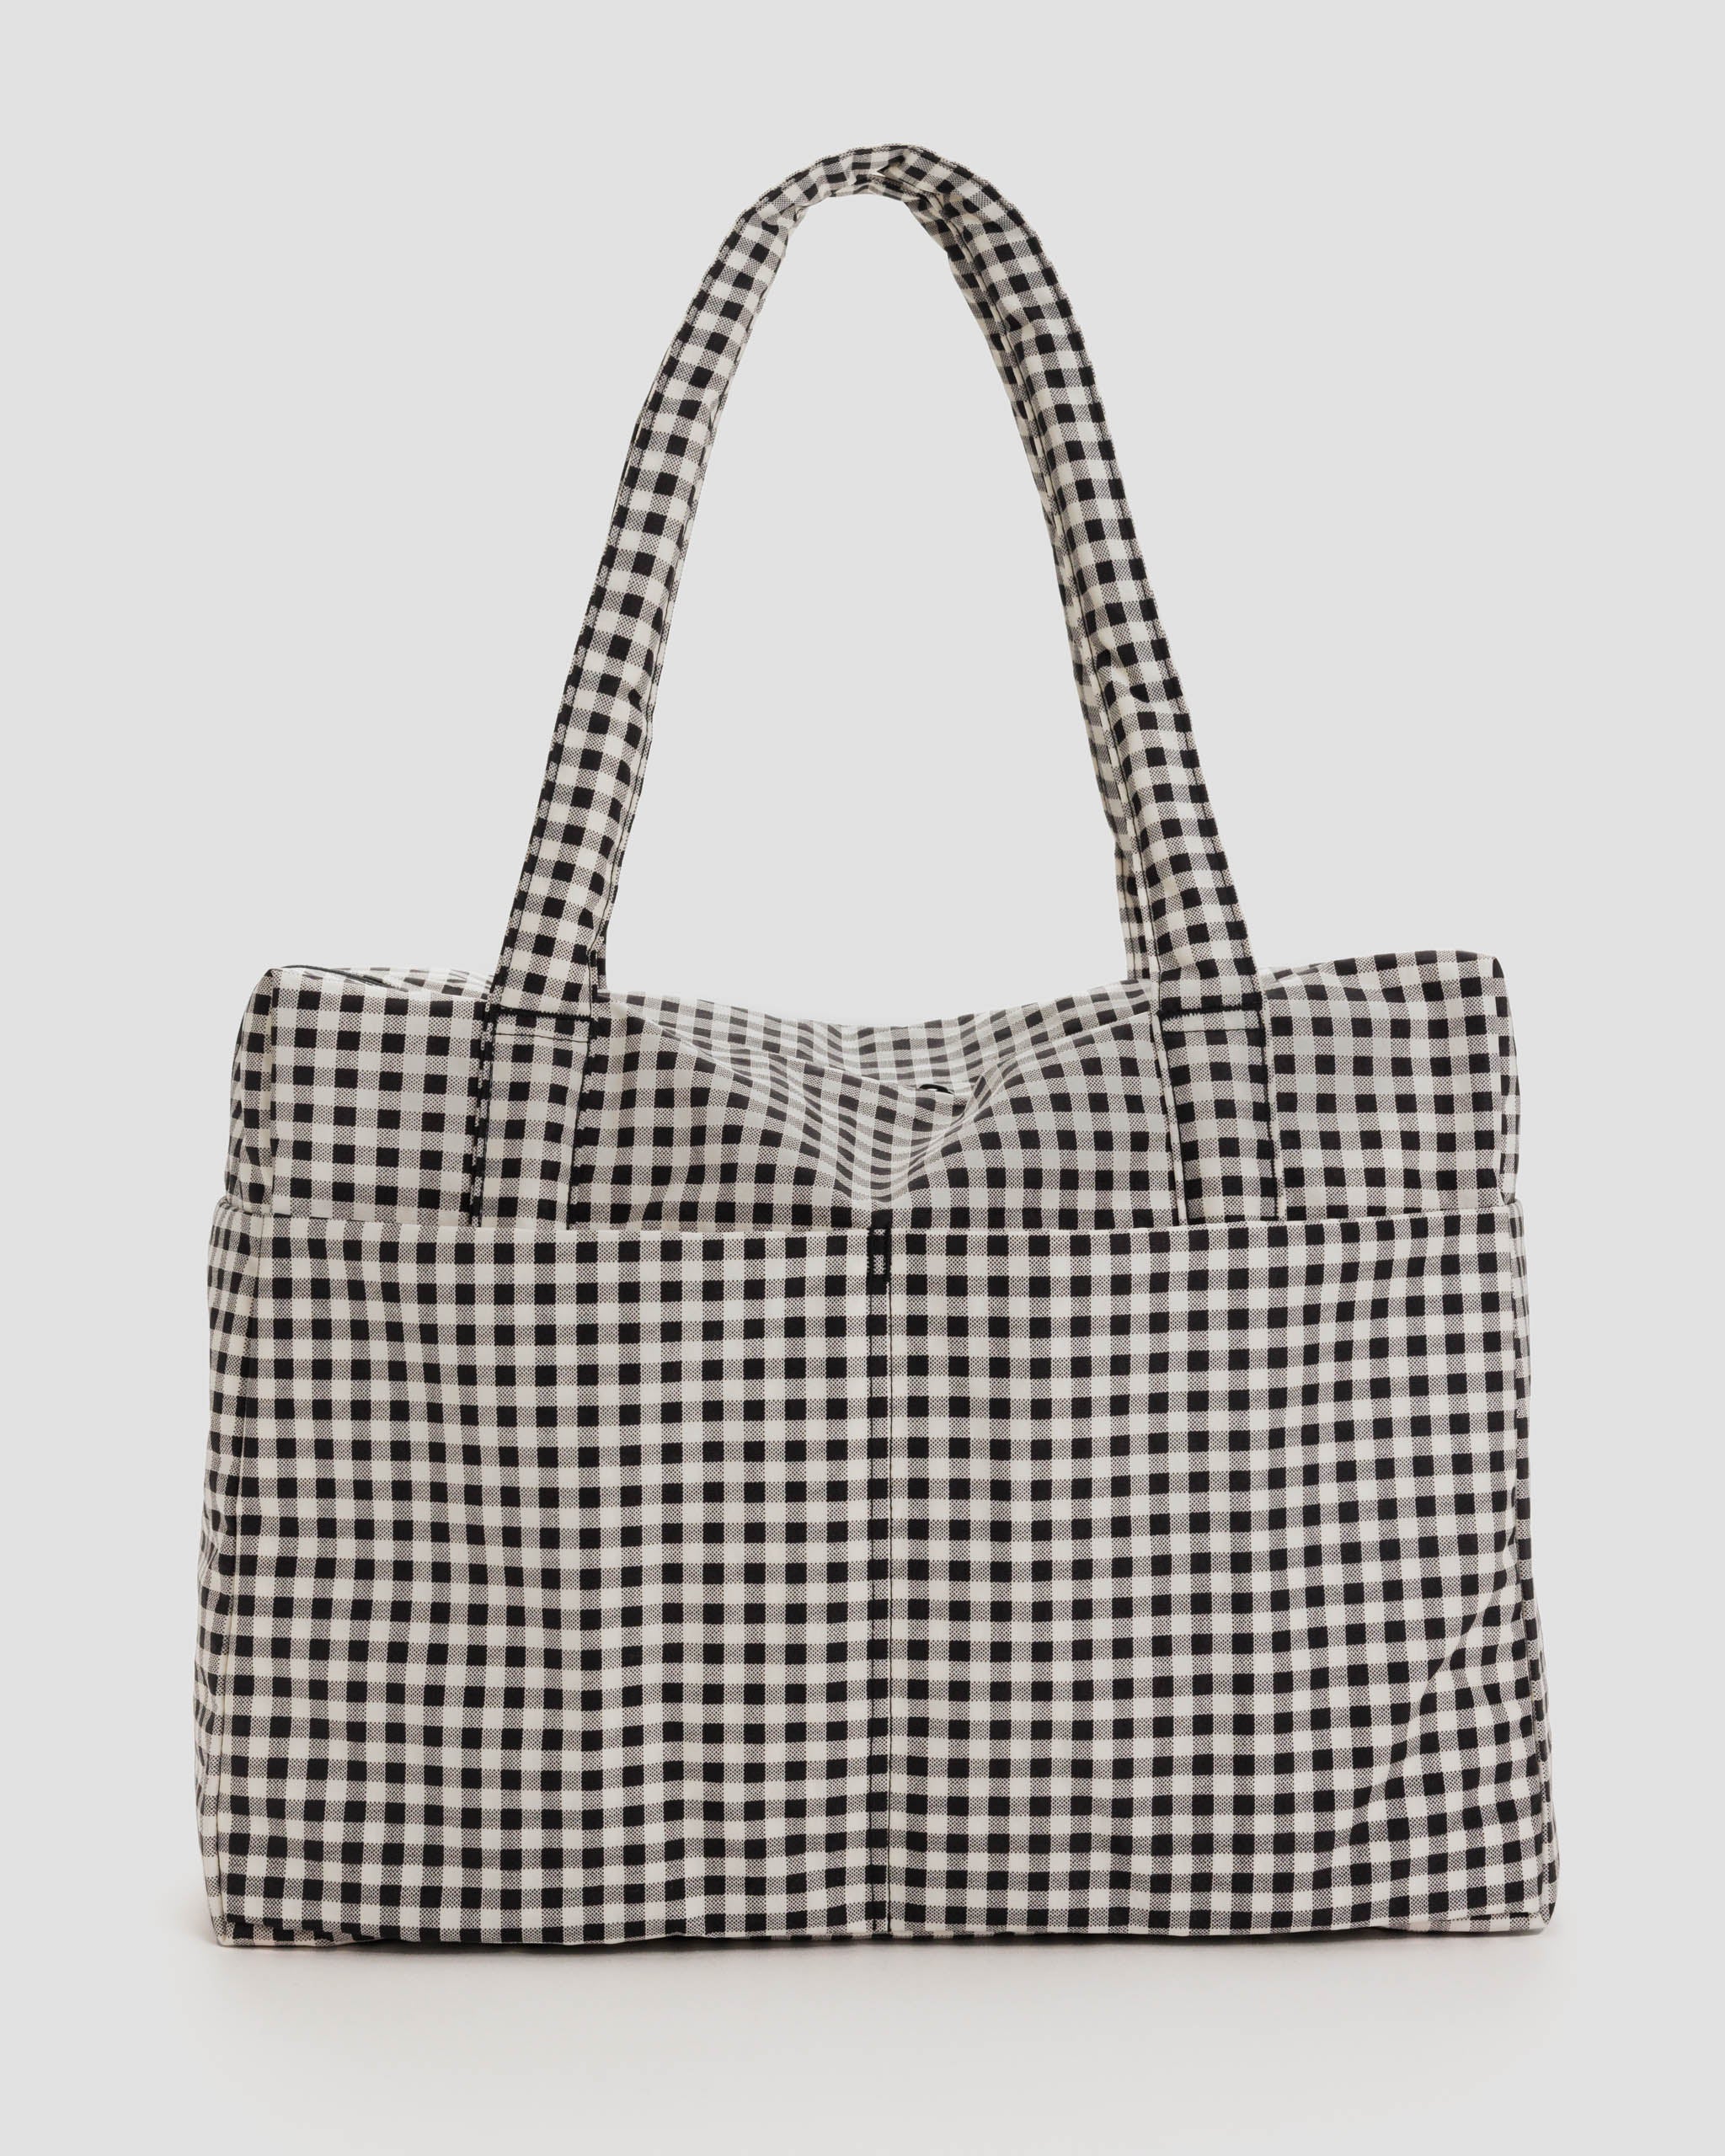 Cloud Carry On Bag (Black & White Gingham)